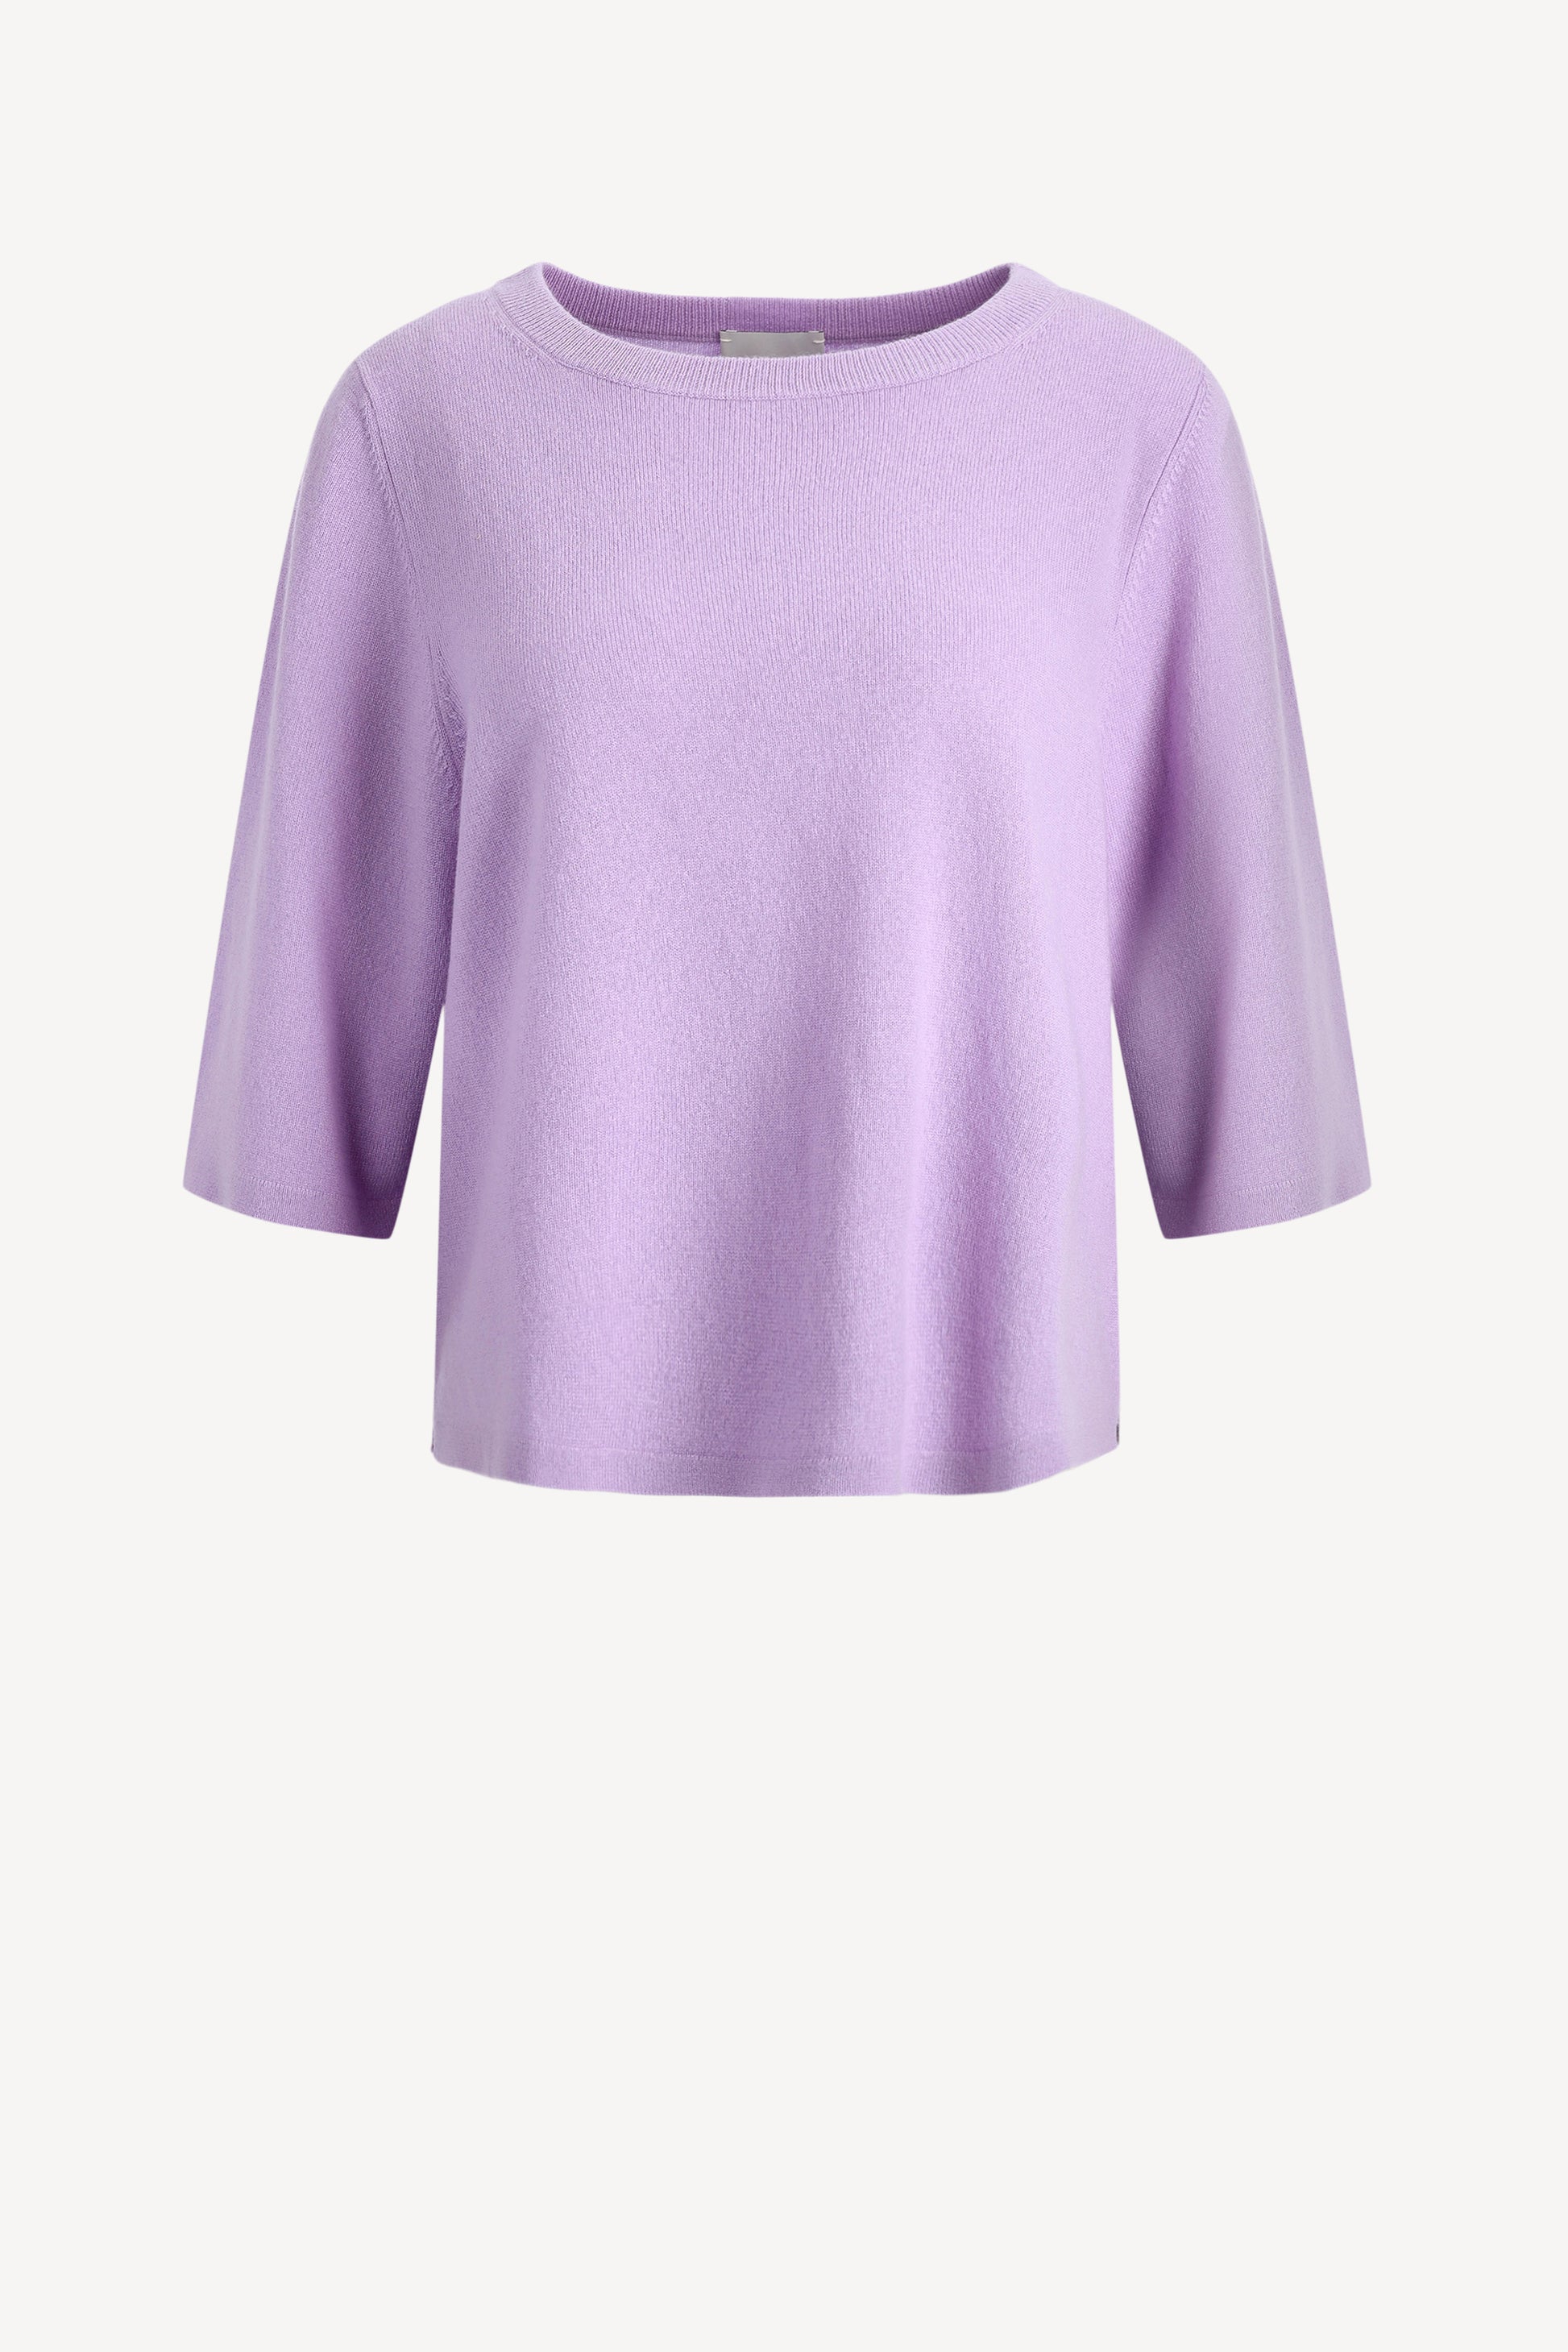 Cropped Pullover in LavenderAllude - Anita Hass